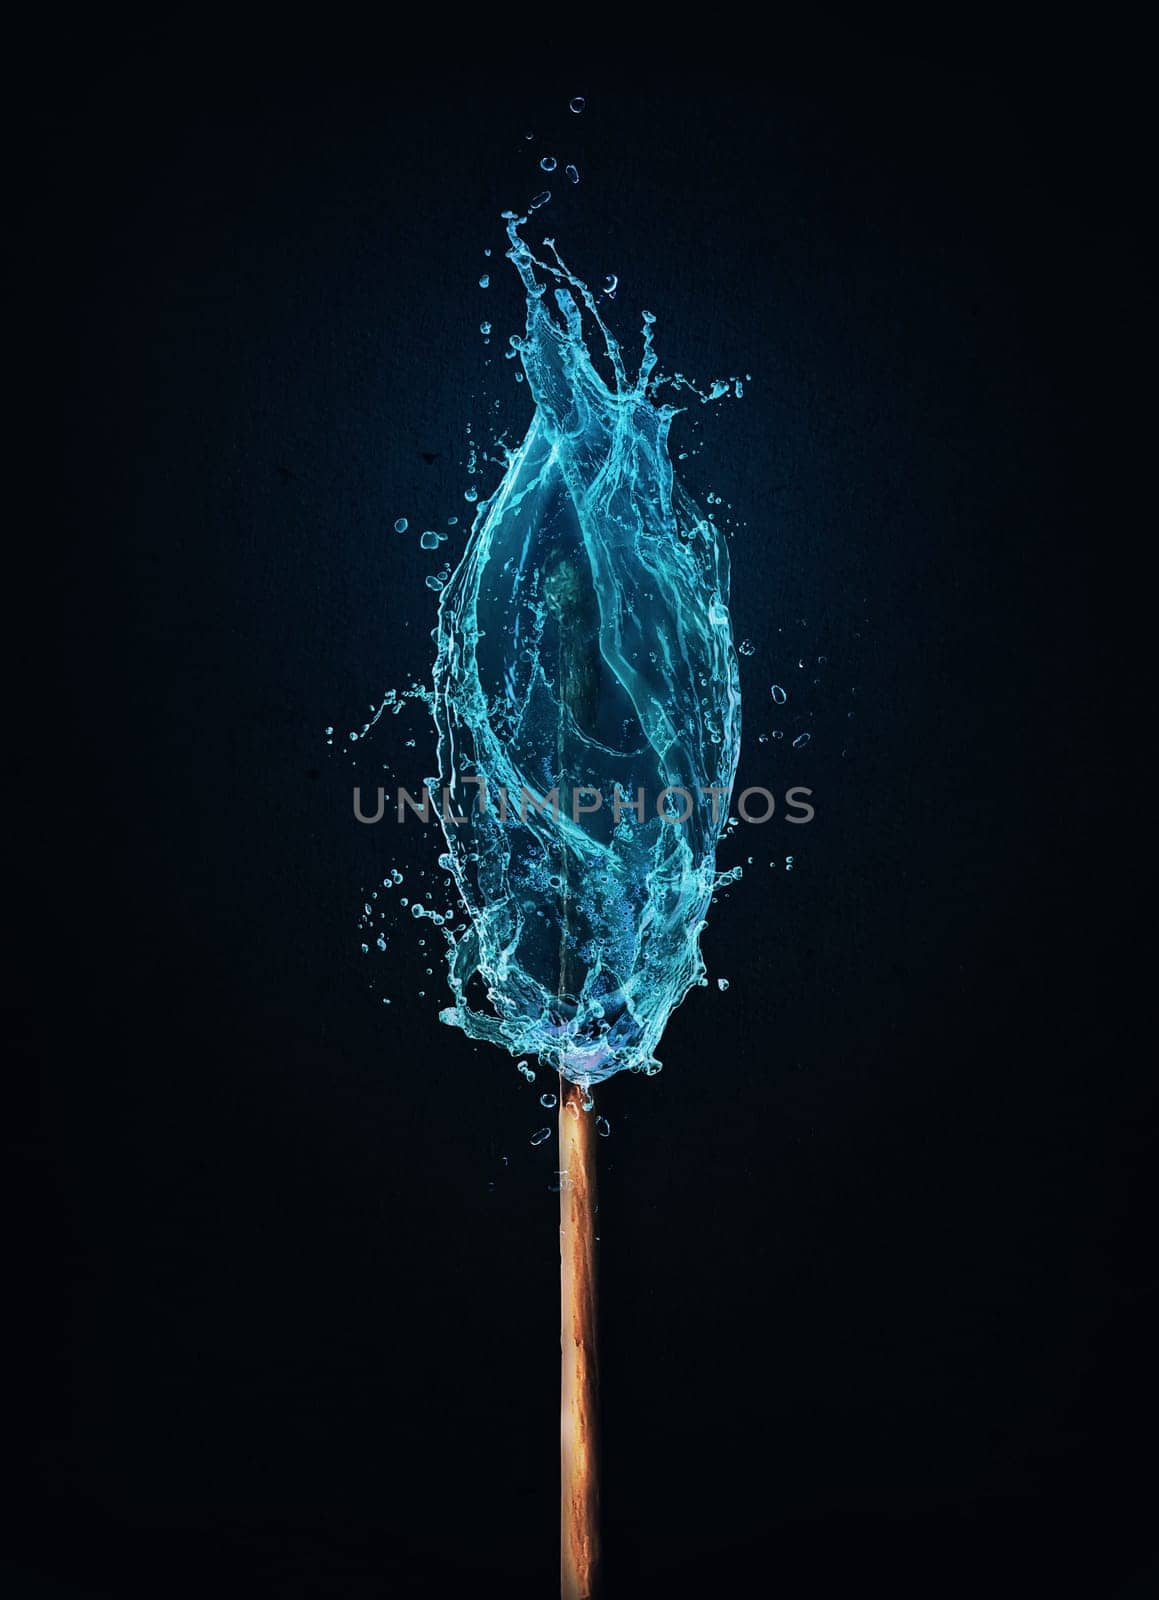 Different thinking concept as an unusual matchstick burning in a water flame. Blue liquid splash drops on a match, instead of fire. Surreal and unique symbol for eco energy and environmental issue